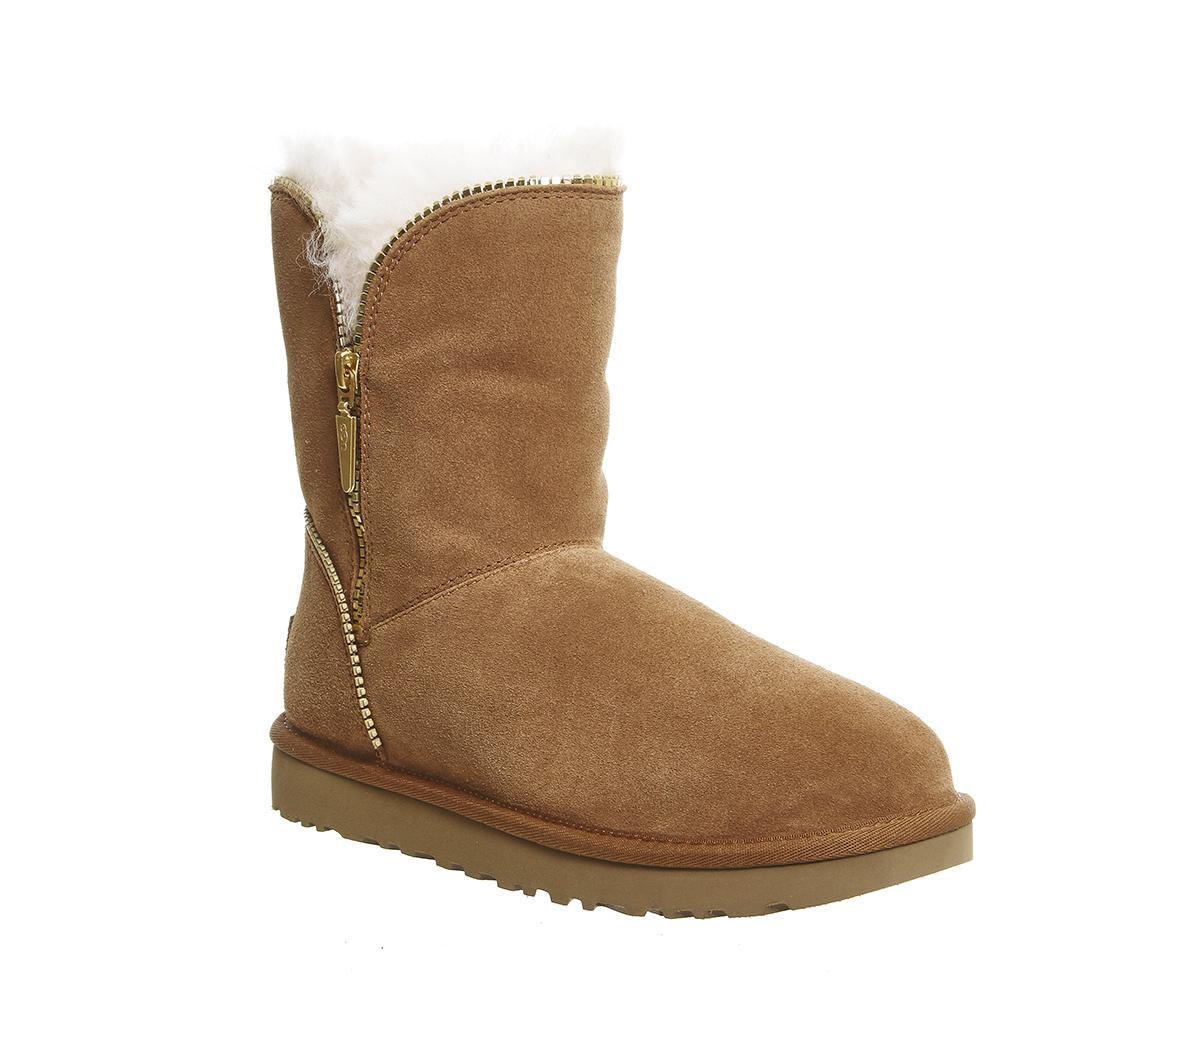 UGG Suede Florence Zip Boots in Chestnut (Brown) - Lyst